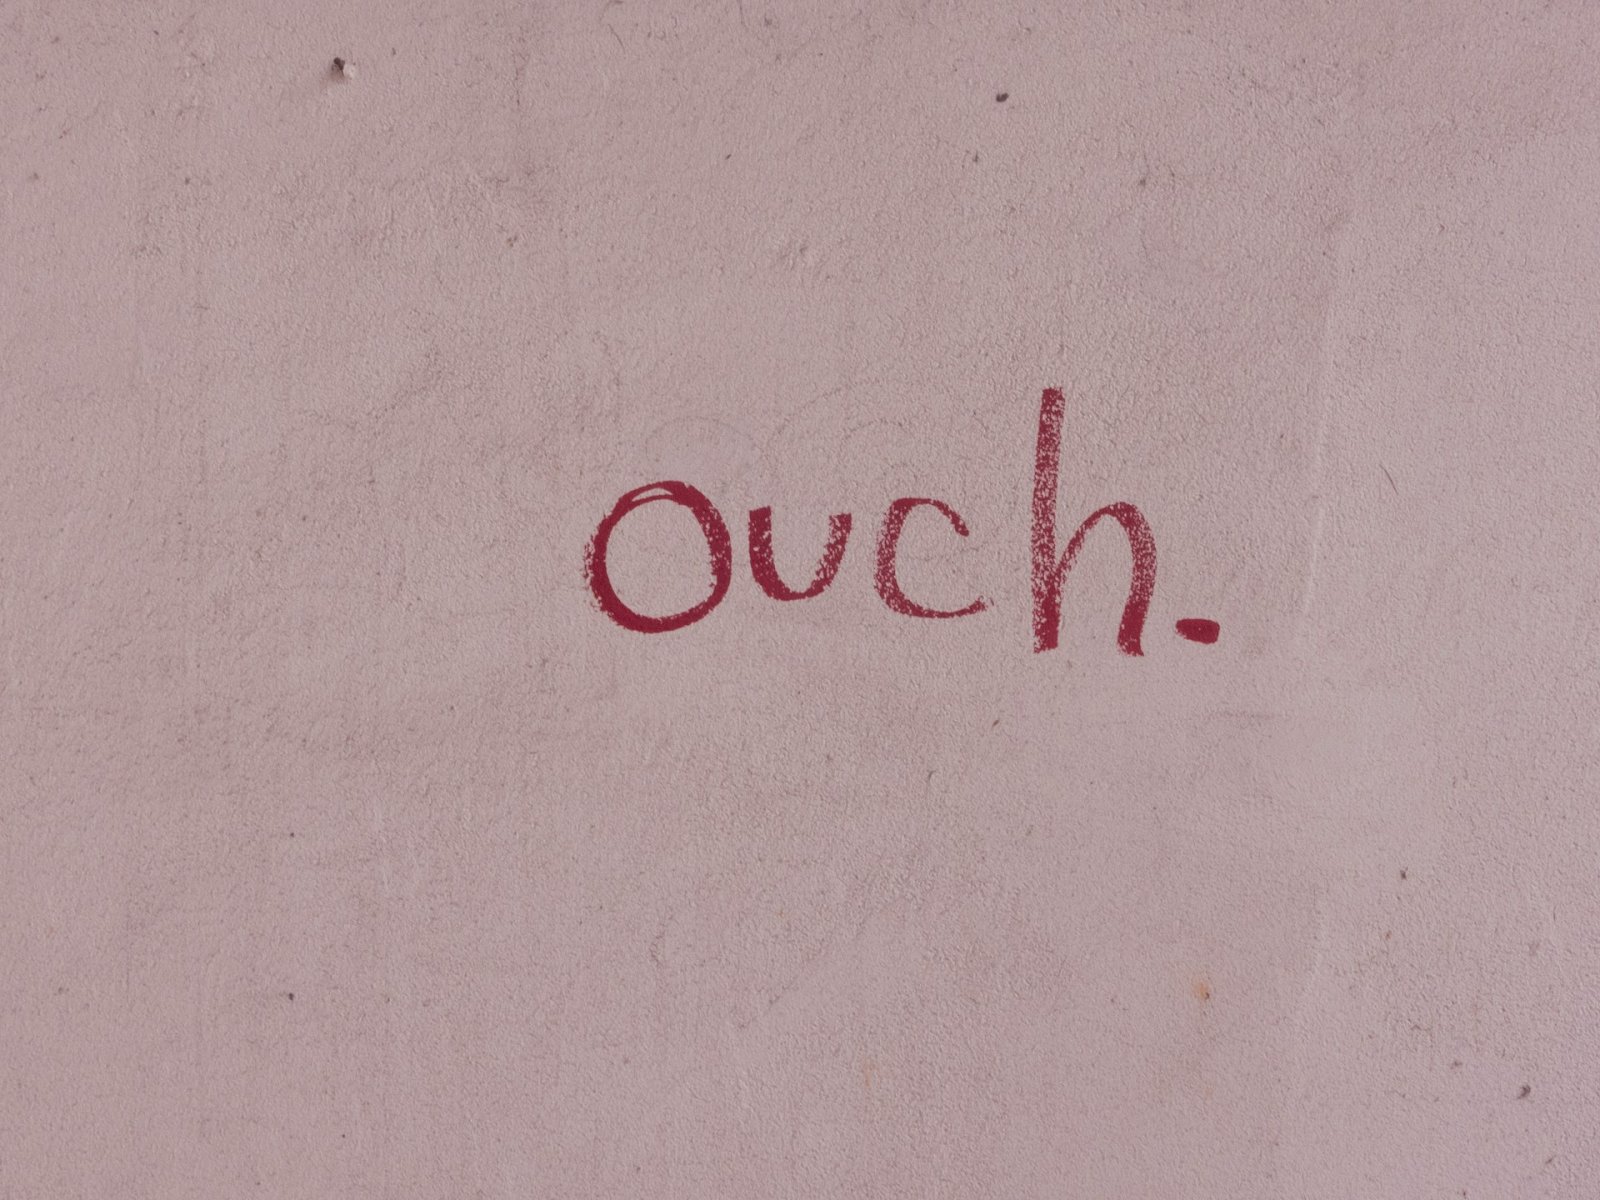 Ouch written on the wall in pink - https://unsplash.com/photos/ouch-sign-SG9Ycz2uqGs